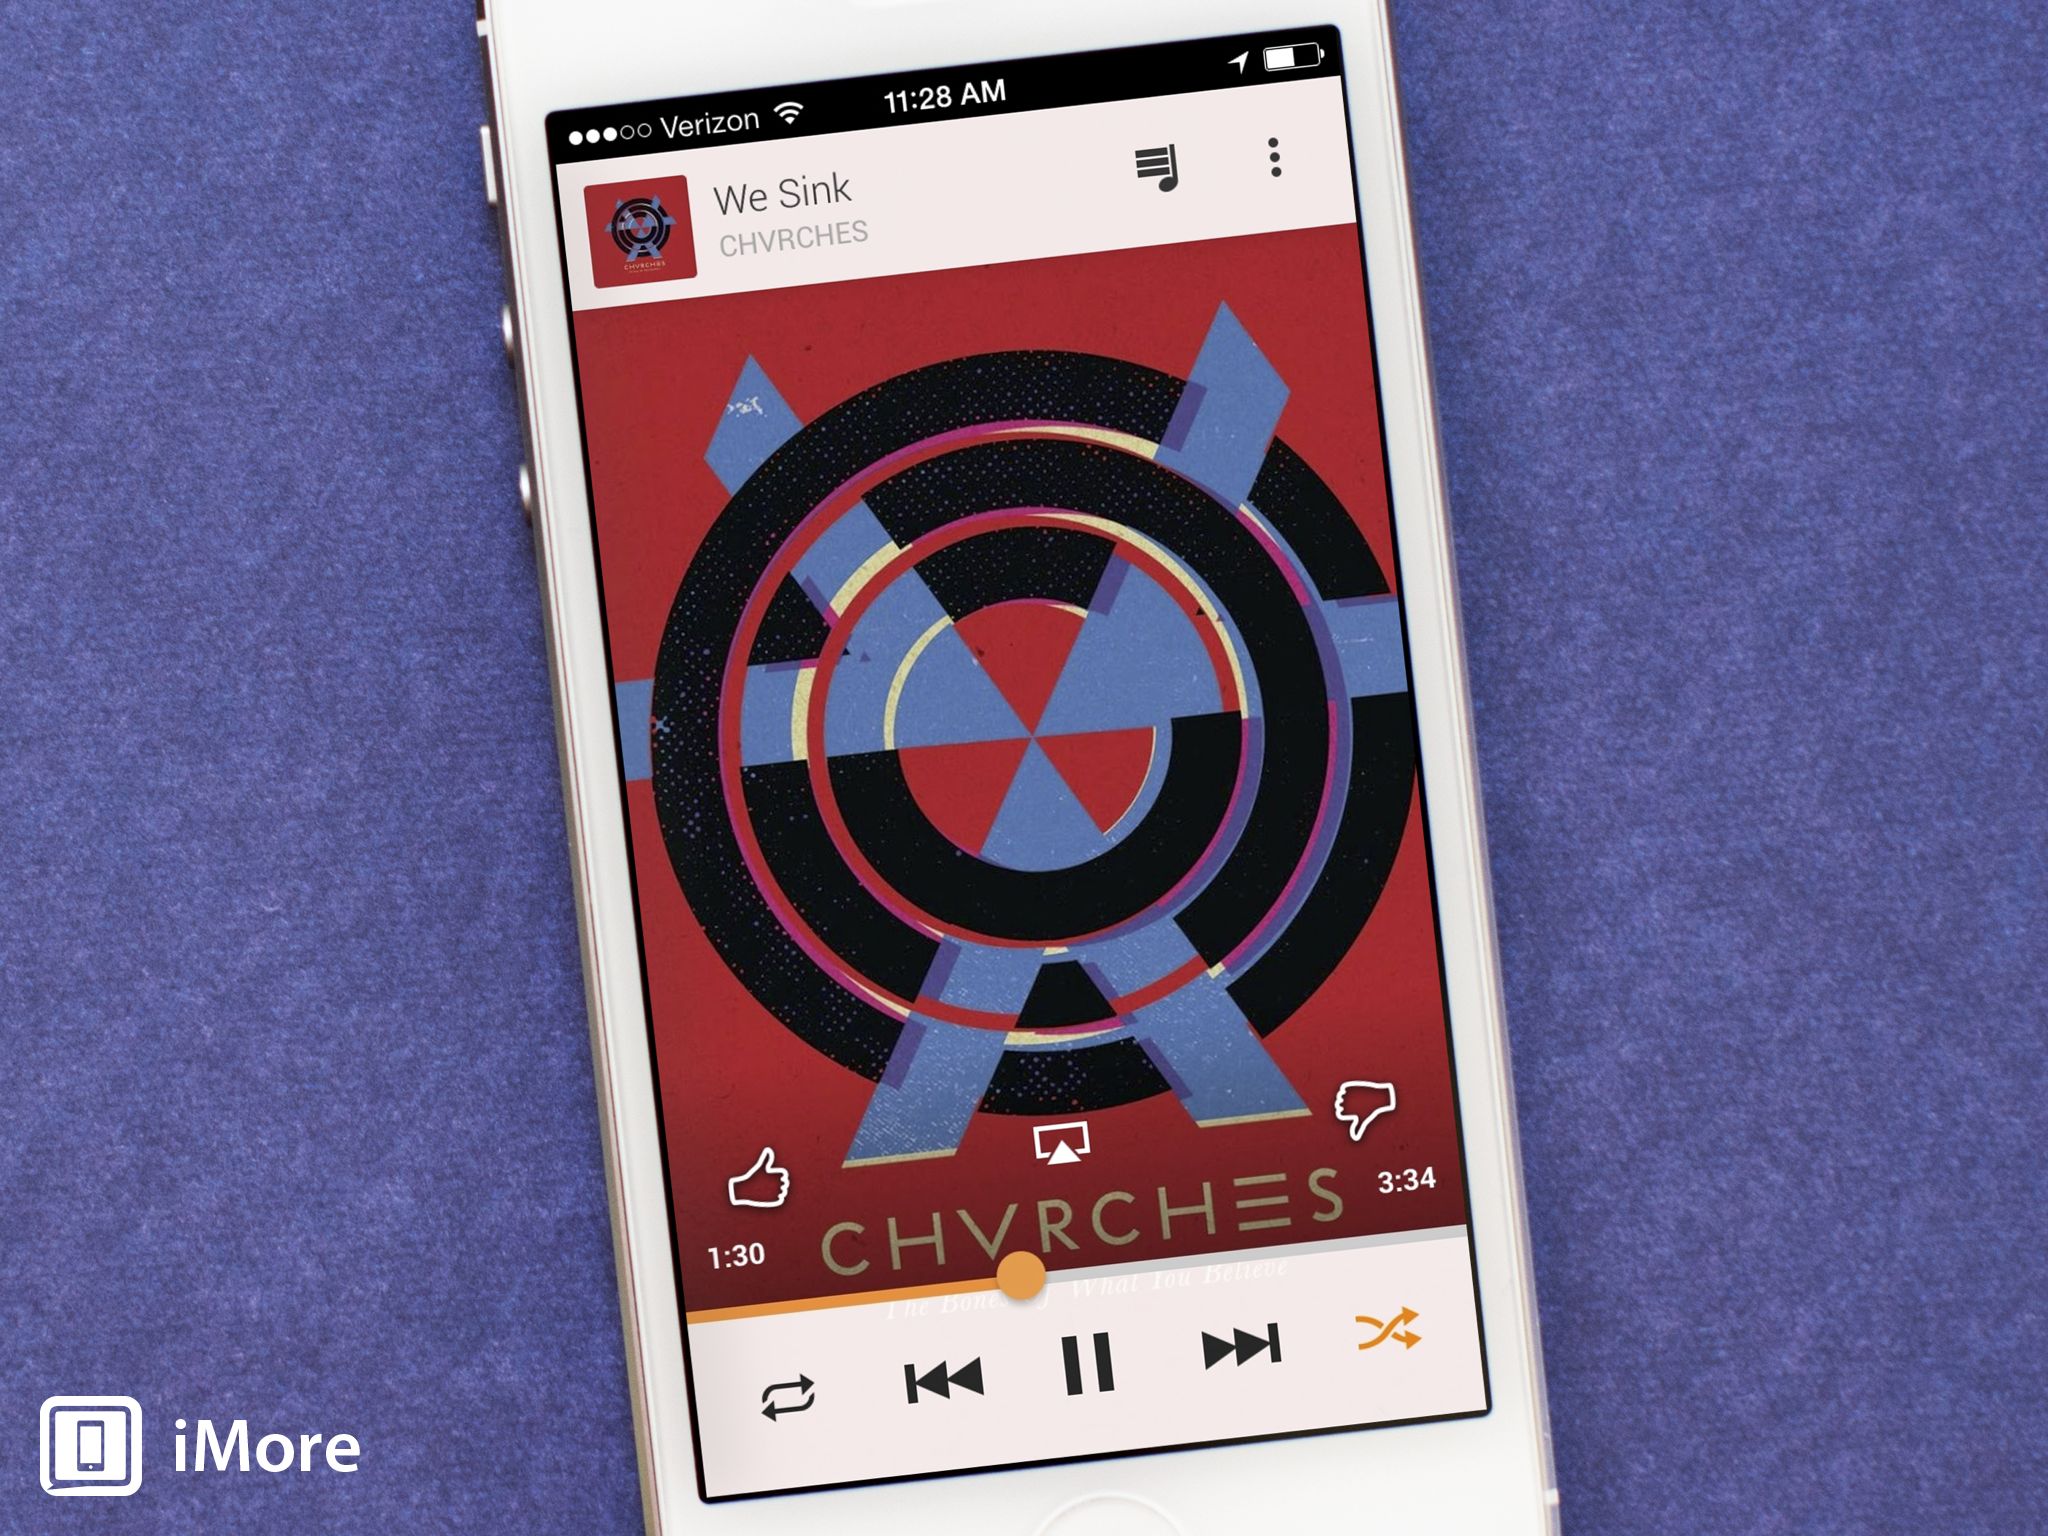 Google Play Music arrives on the iPhone